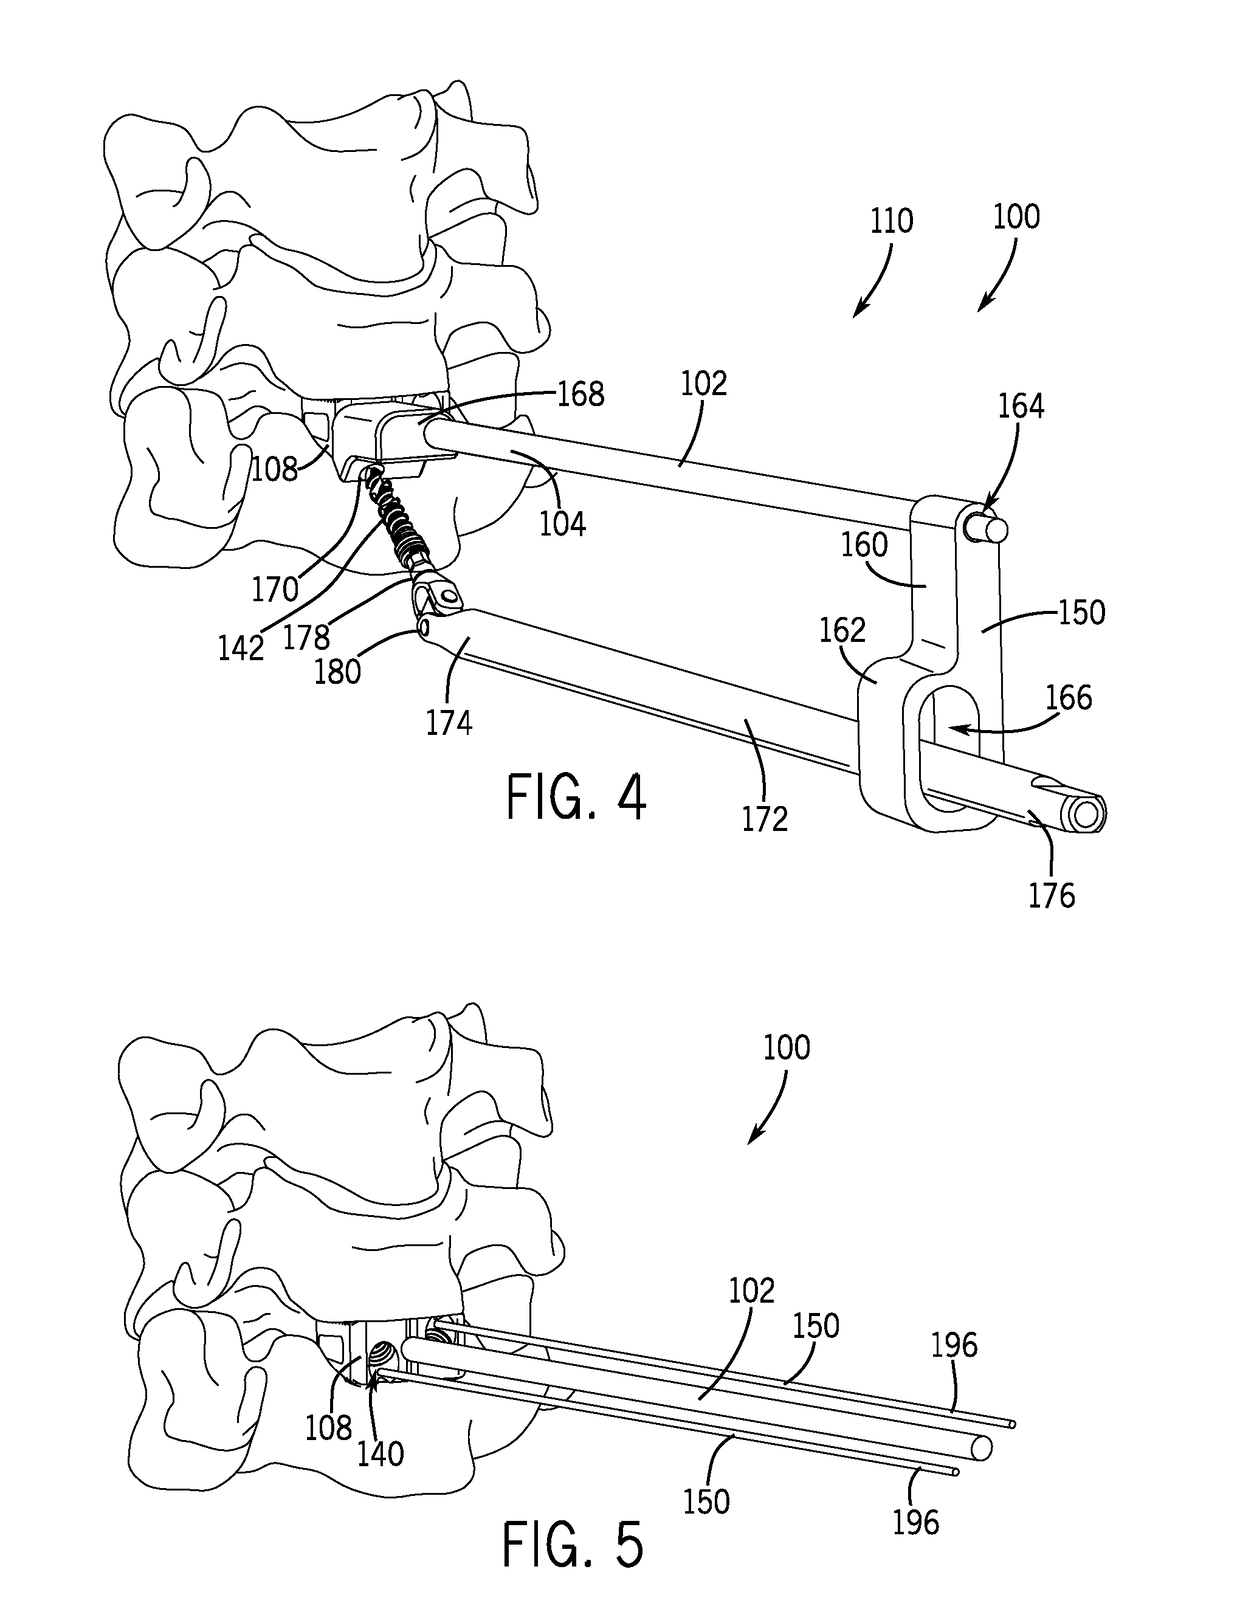 Spinal joint implant delivery device and system